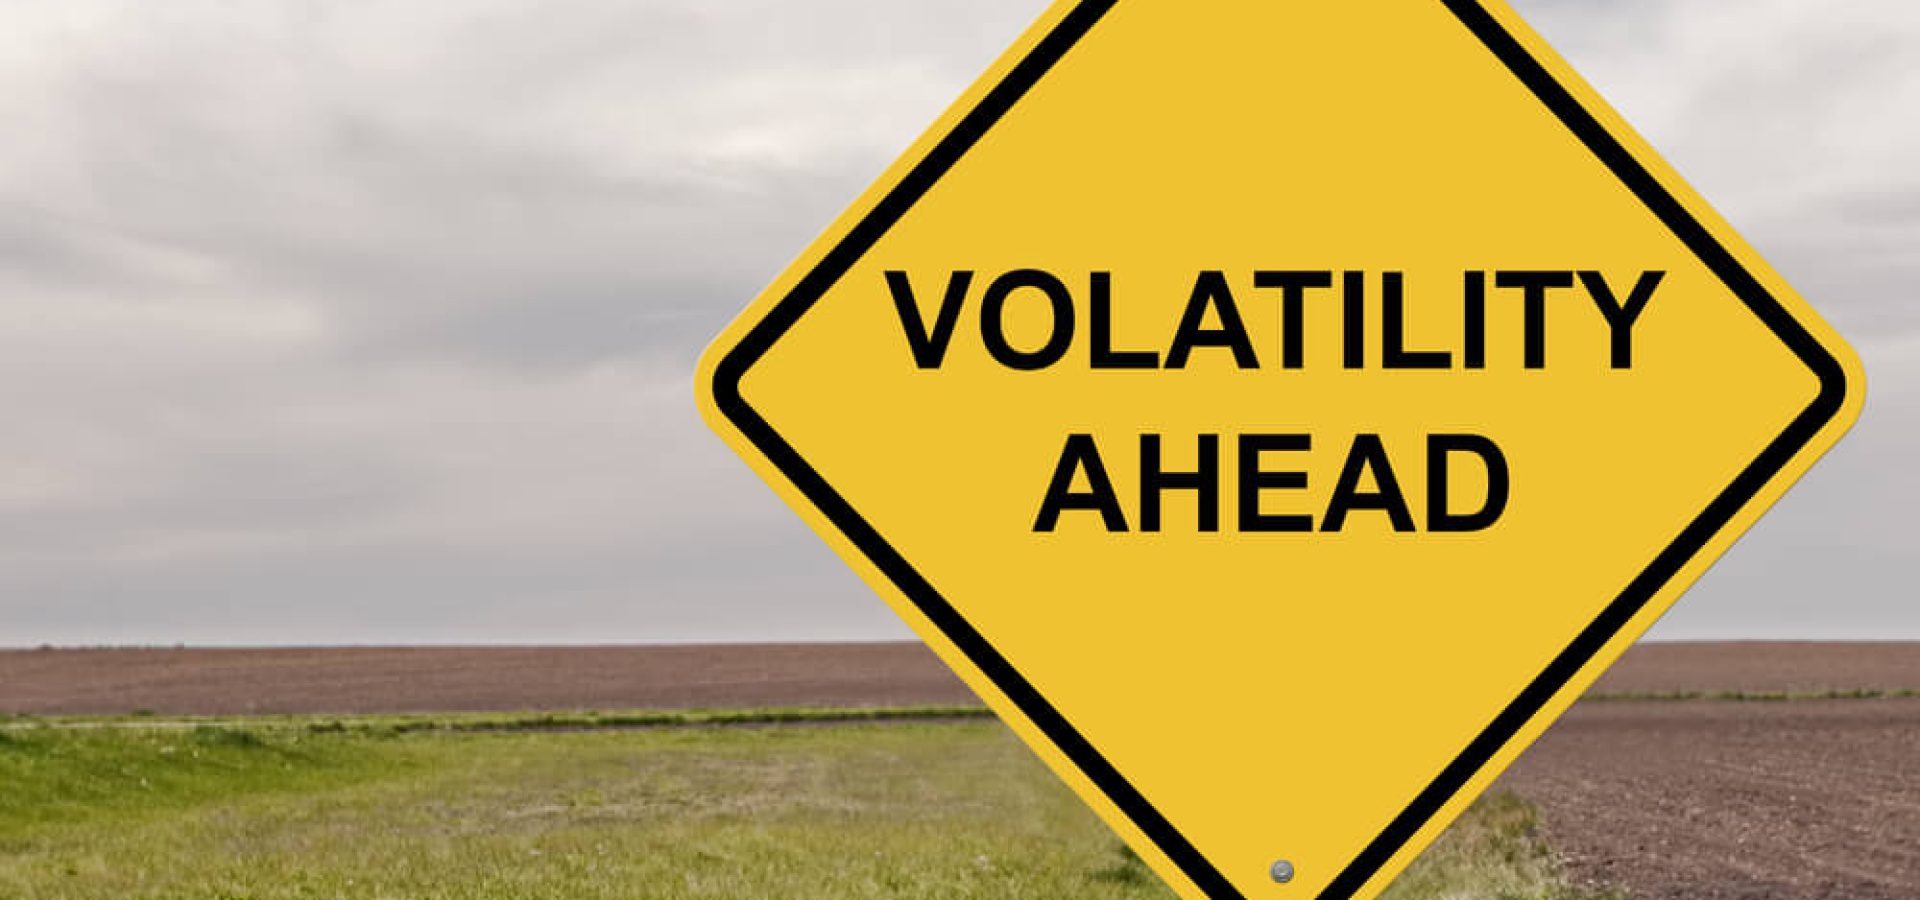 Volatility ahead written in a sign post